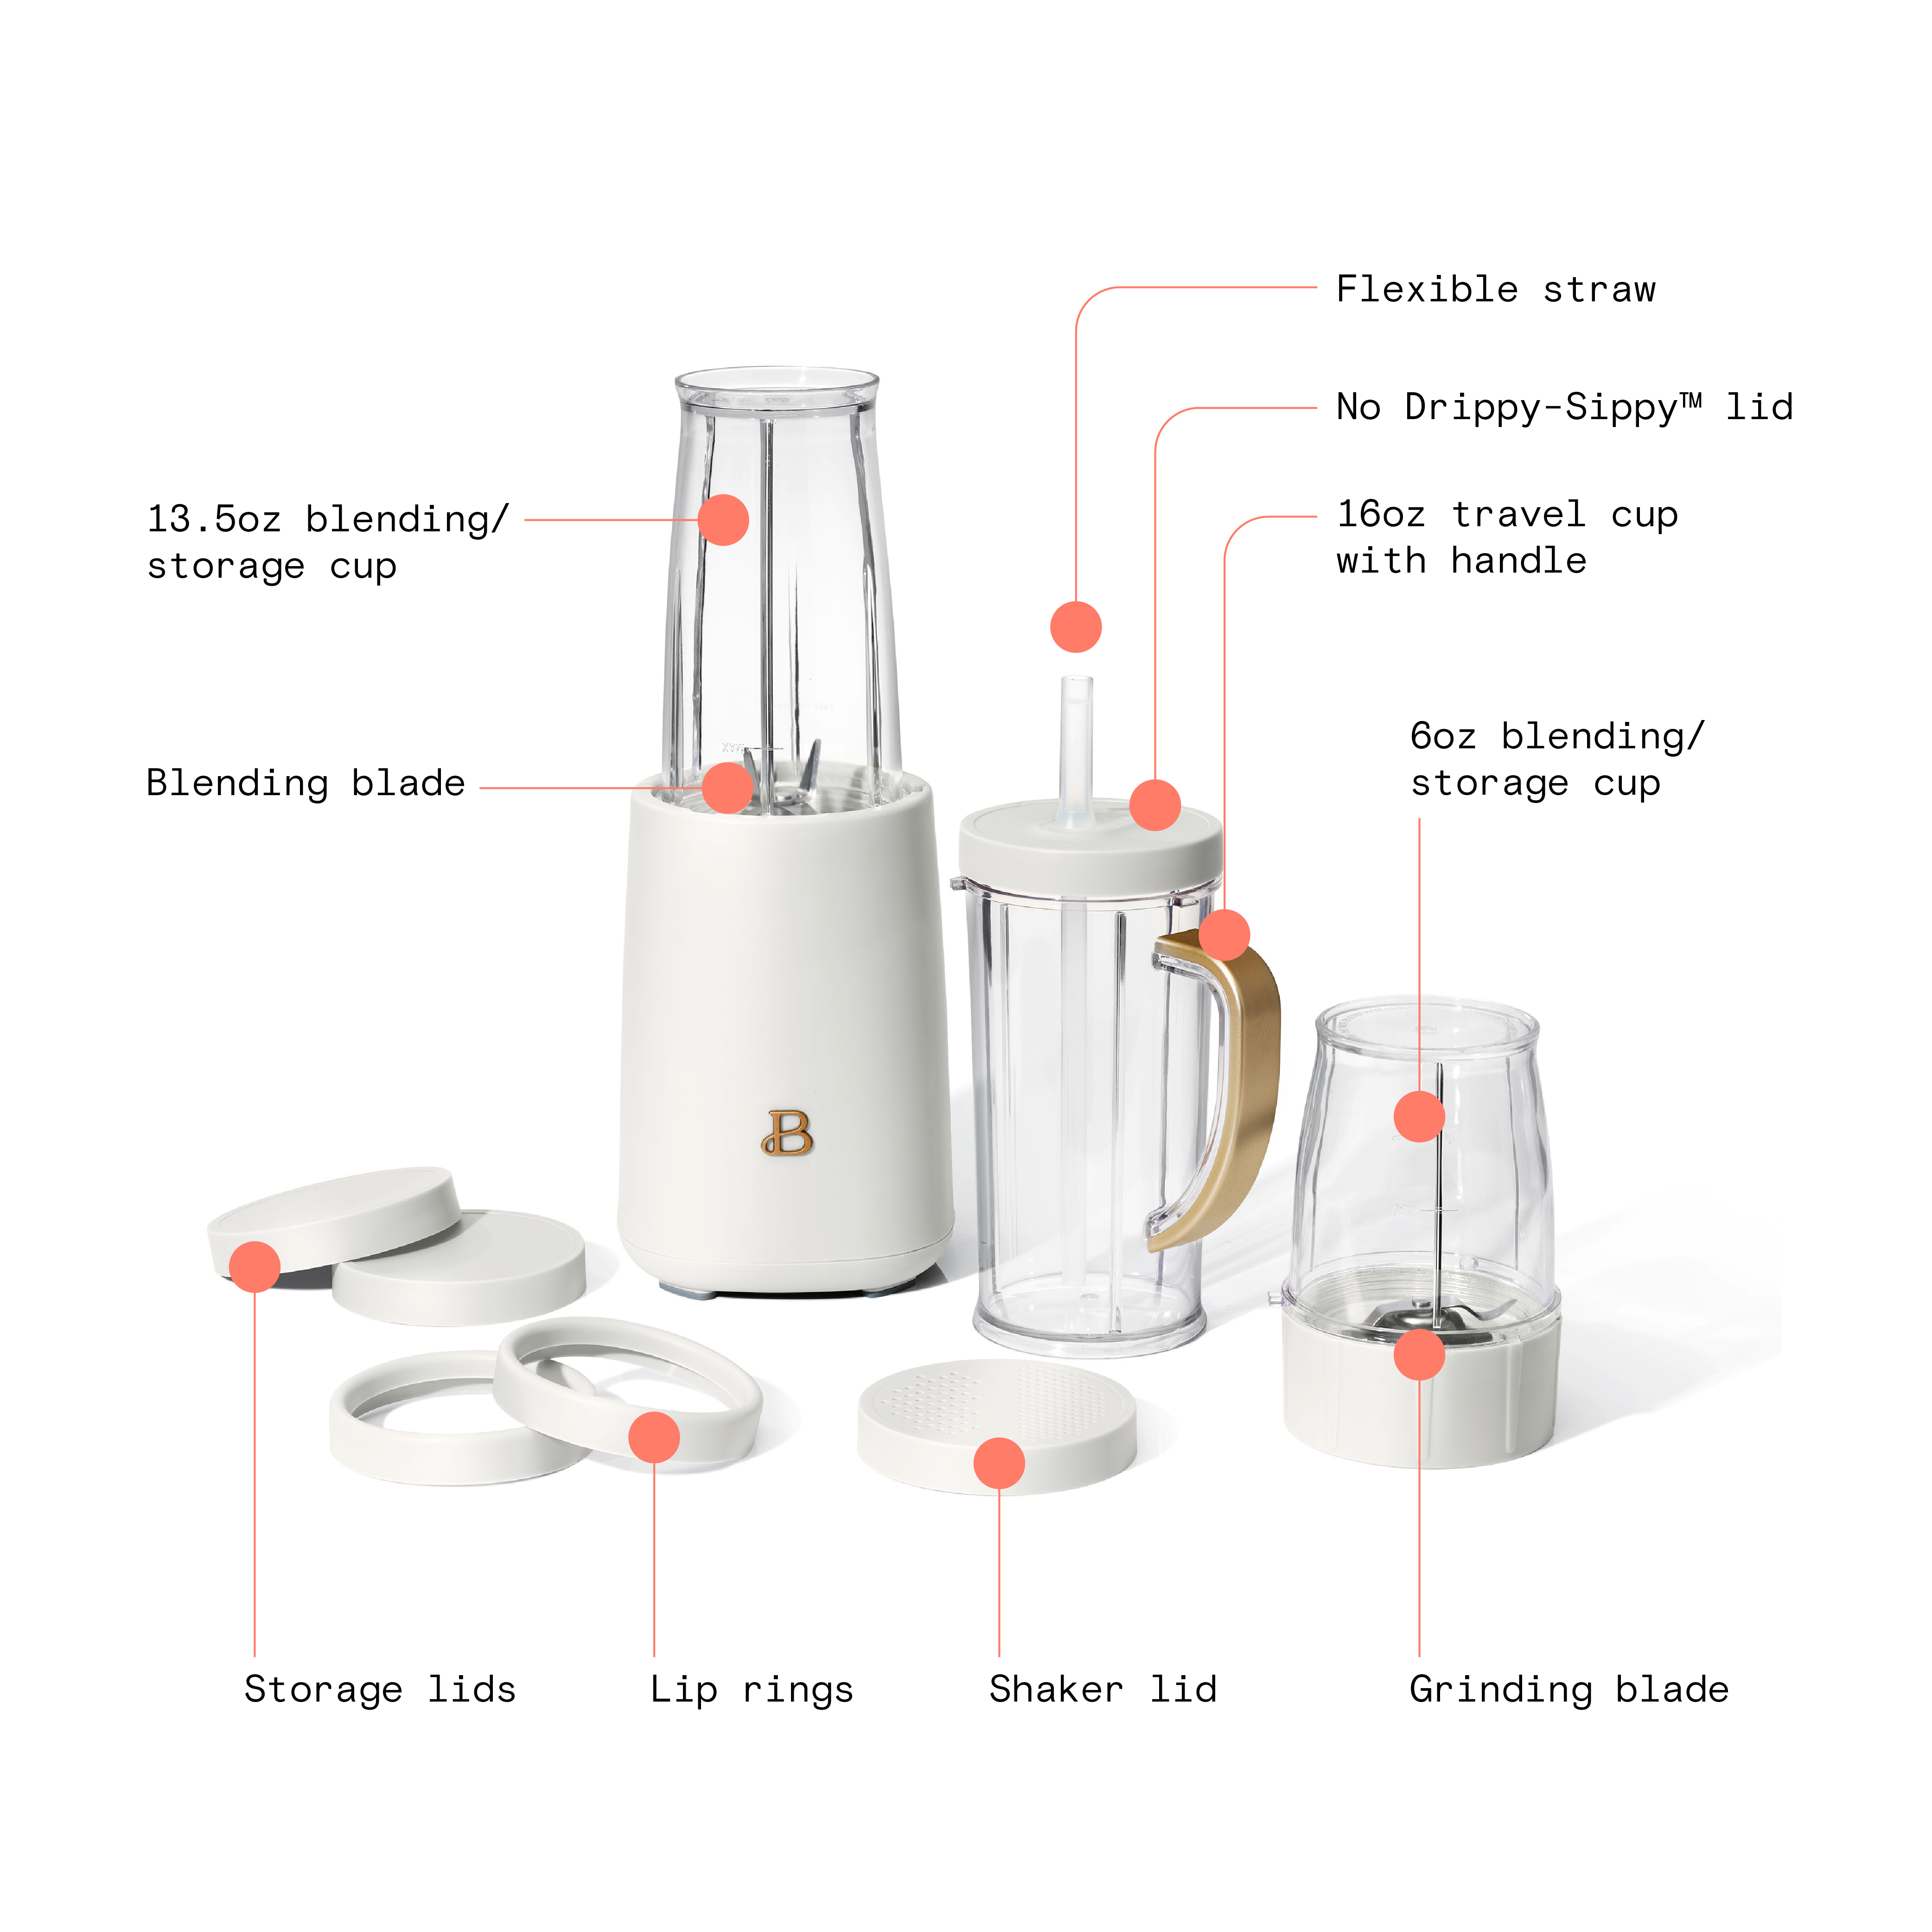 Beautiful Personal Blender Set with 12 Pieces, 240 W, White Icing by Drew Barrymore - image 5 of 13